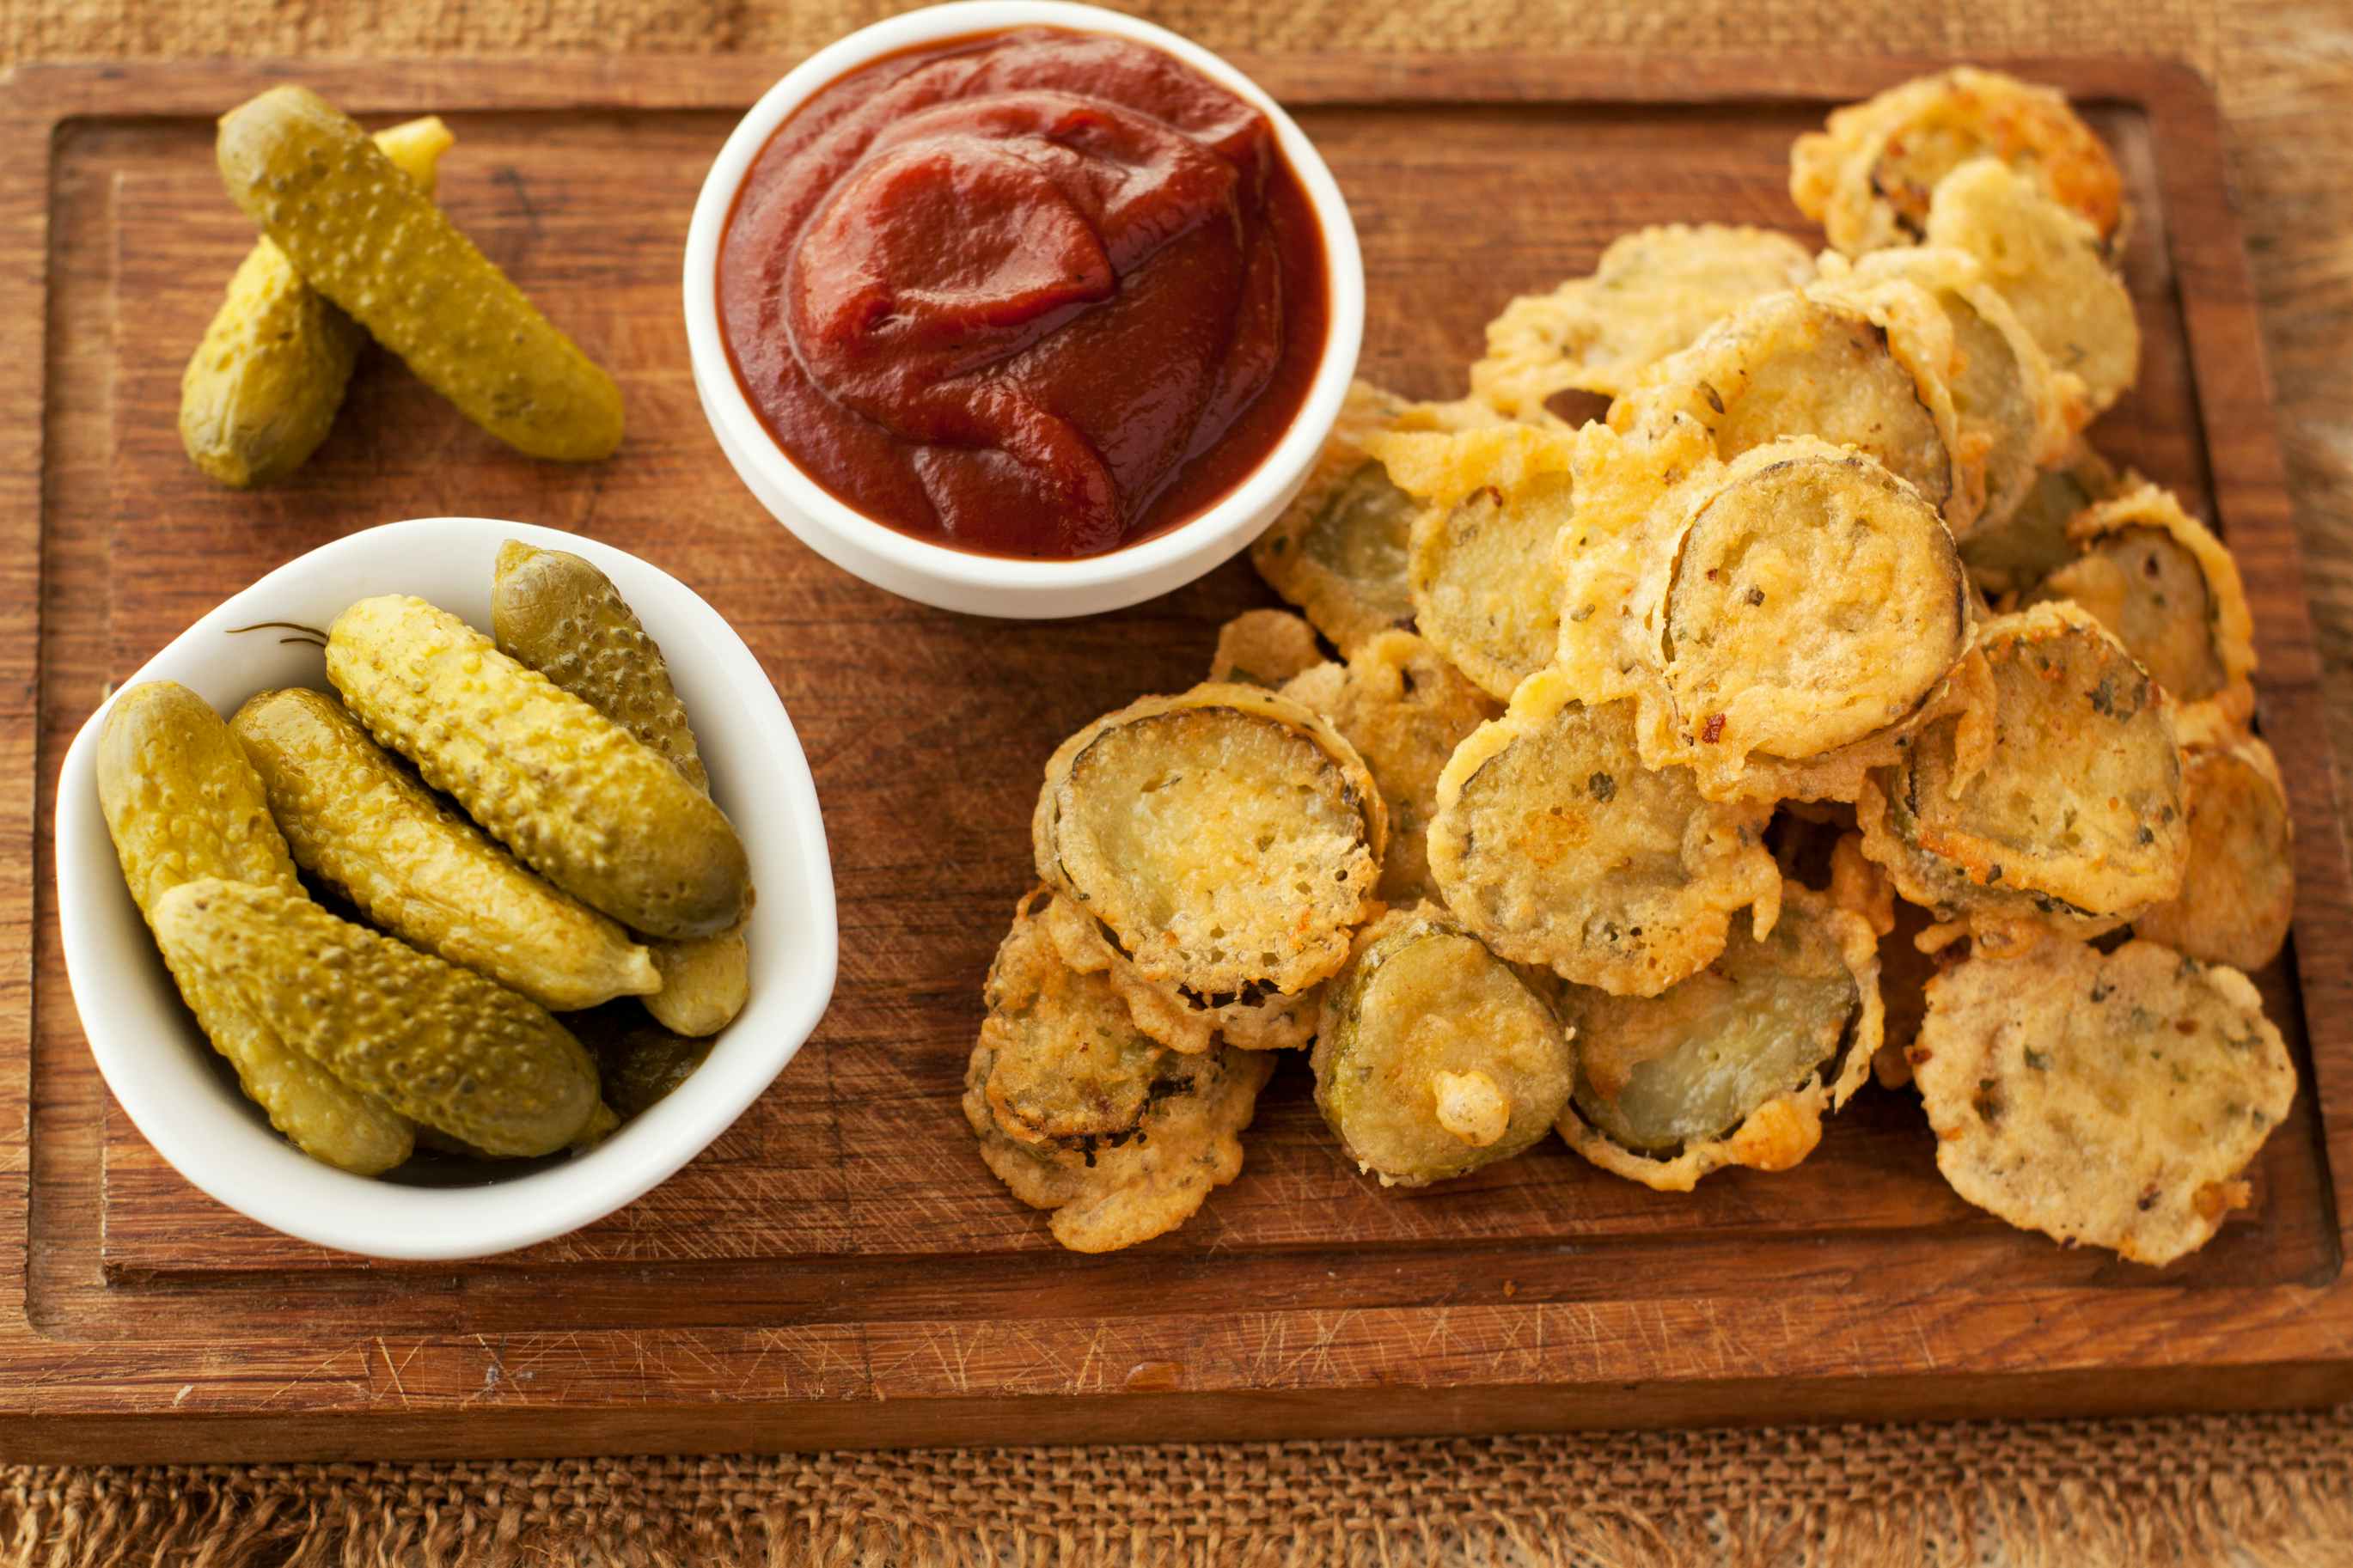 Fried pickles next to pickles and a bowl of ketchup